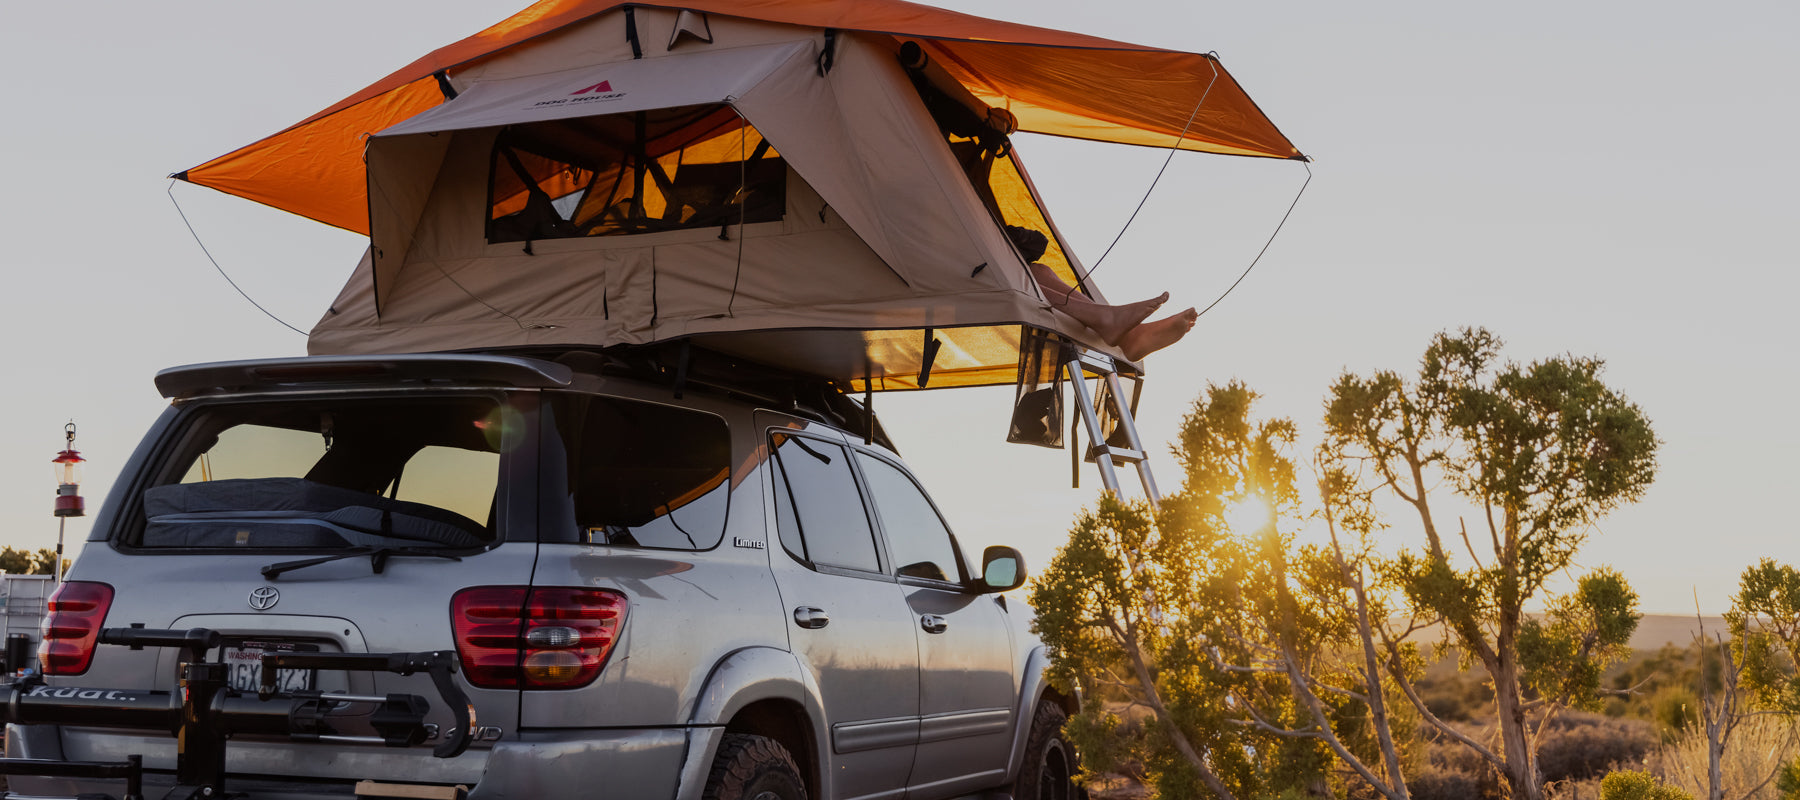 Rooftop Tent Camping and Why It's The Best Way To Camp. Pop Up Rooftop Tents.